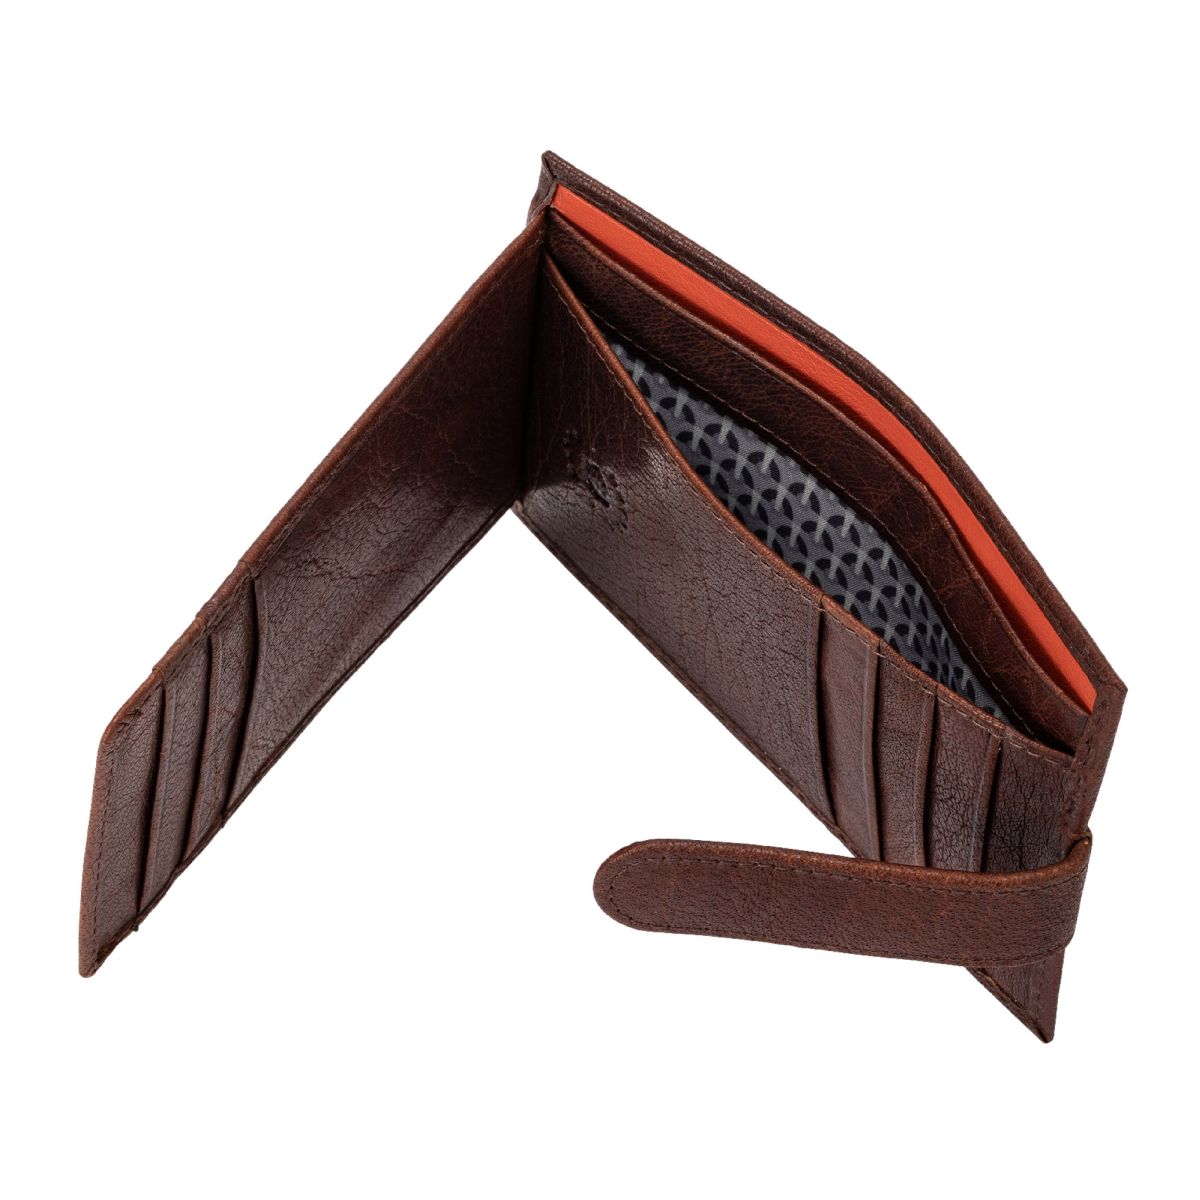 NUVOLA PELLE Compact multi color credit card holder wallet - Brown